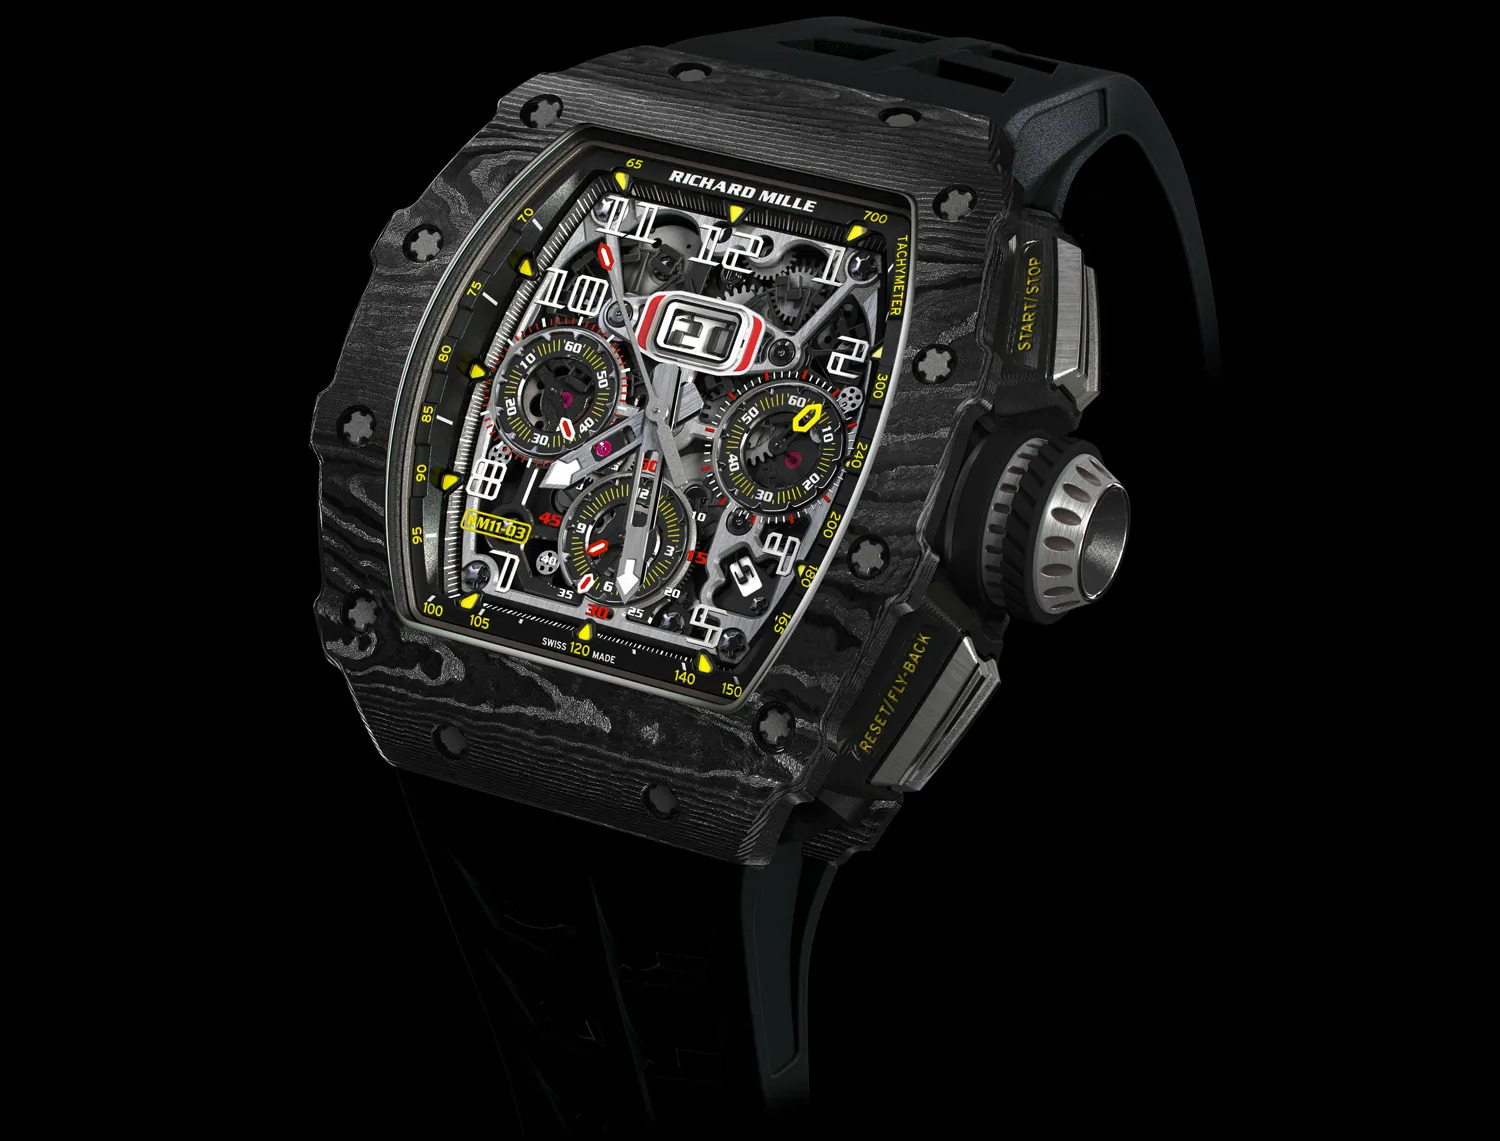 RM 11-03 Flyback Chronograph in Black Carbon